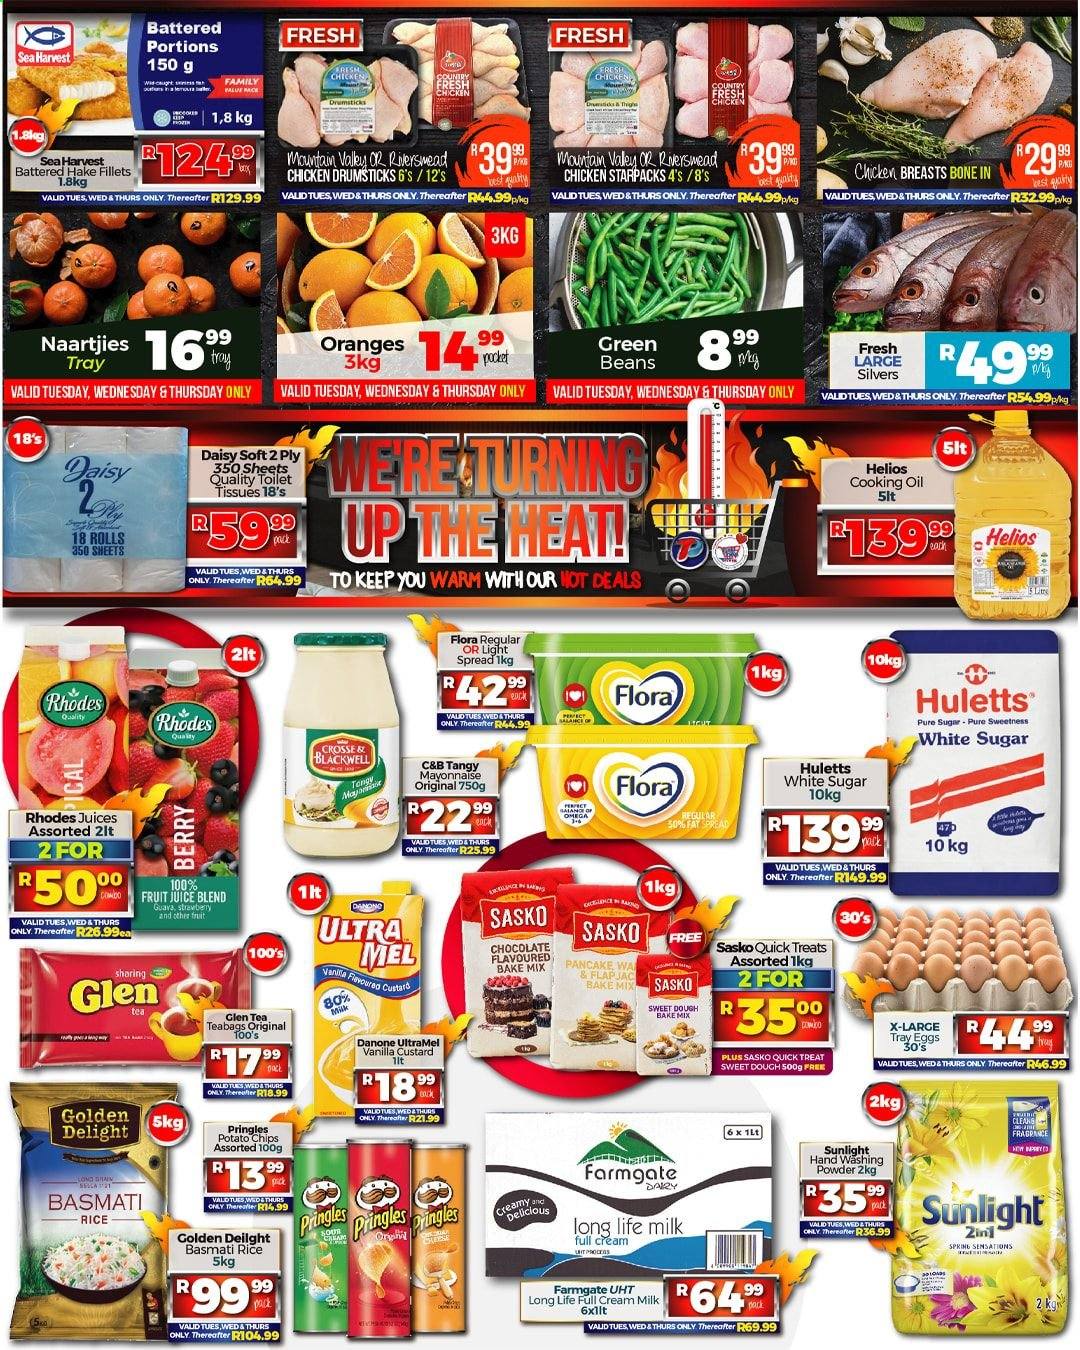 Take n Pay specials - 06.22.2021 - 06.27.2021. 